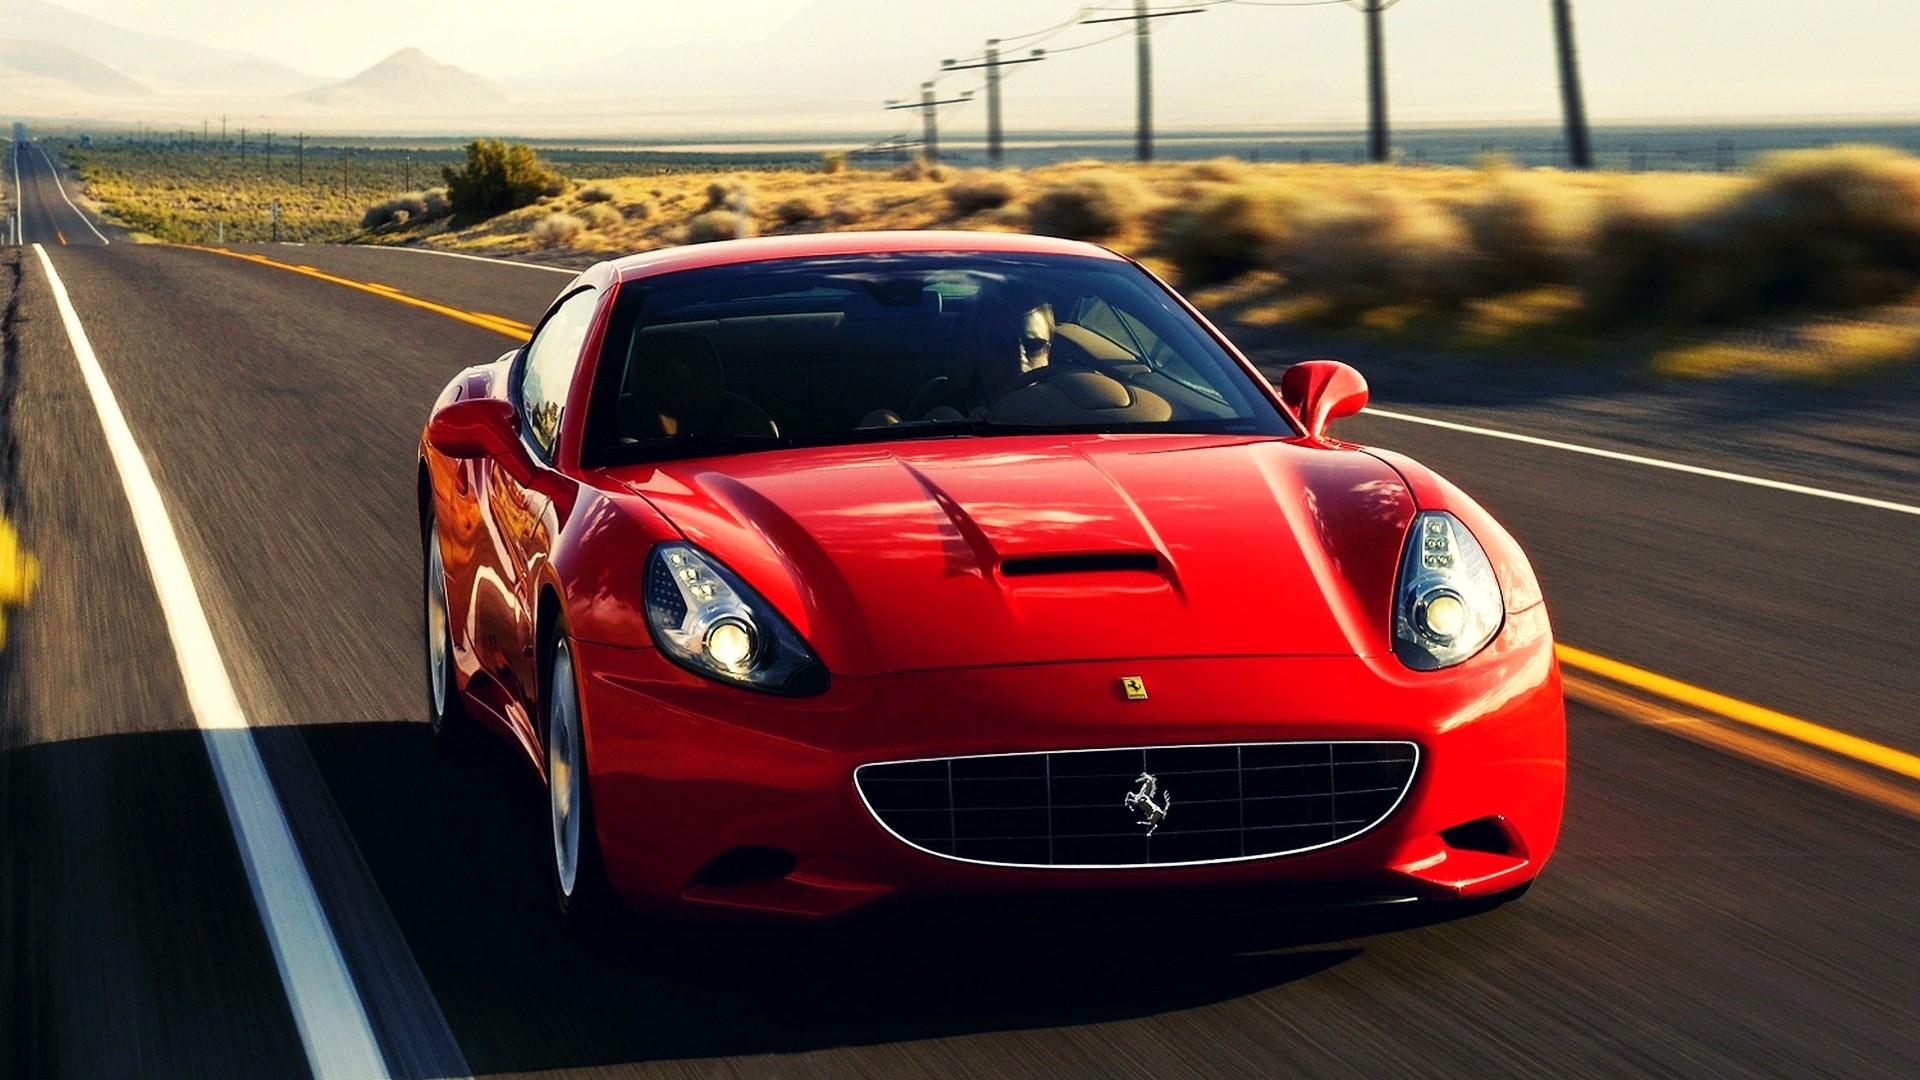 Wallpaper with a red Ferrari California on a country highway